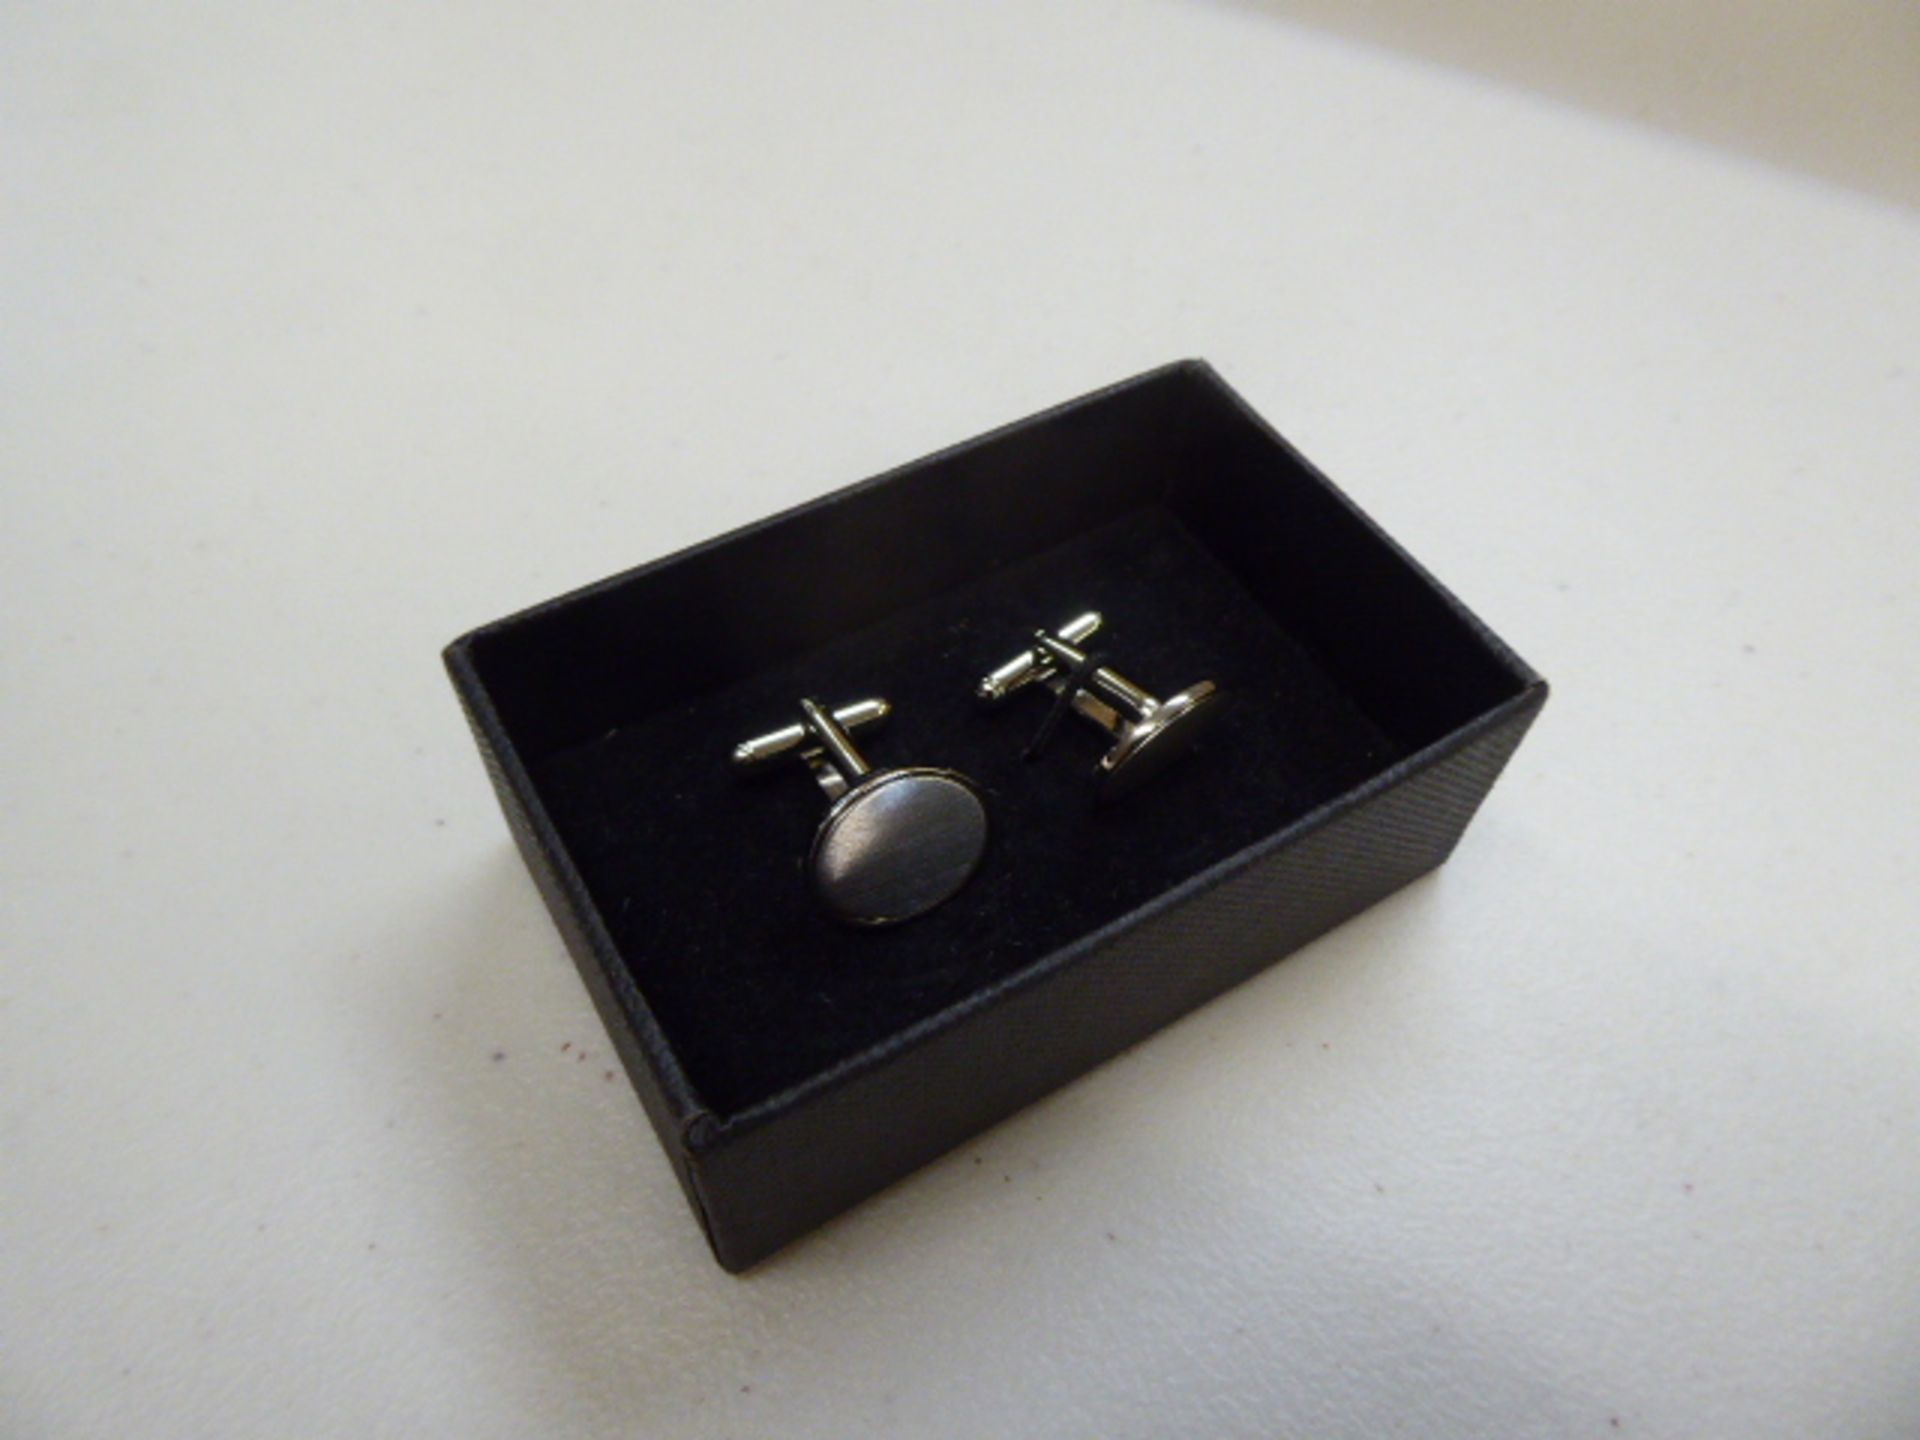 Approximately 900 oval cufflinks in presentation boxes